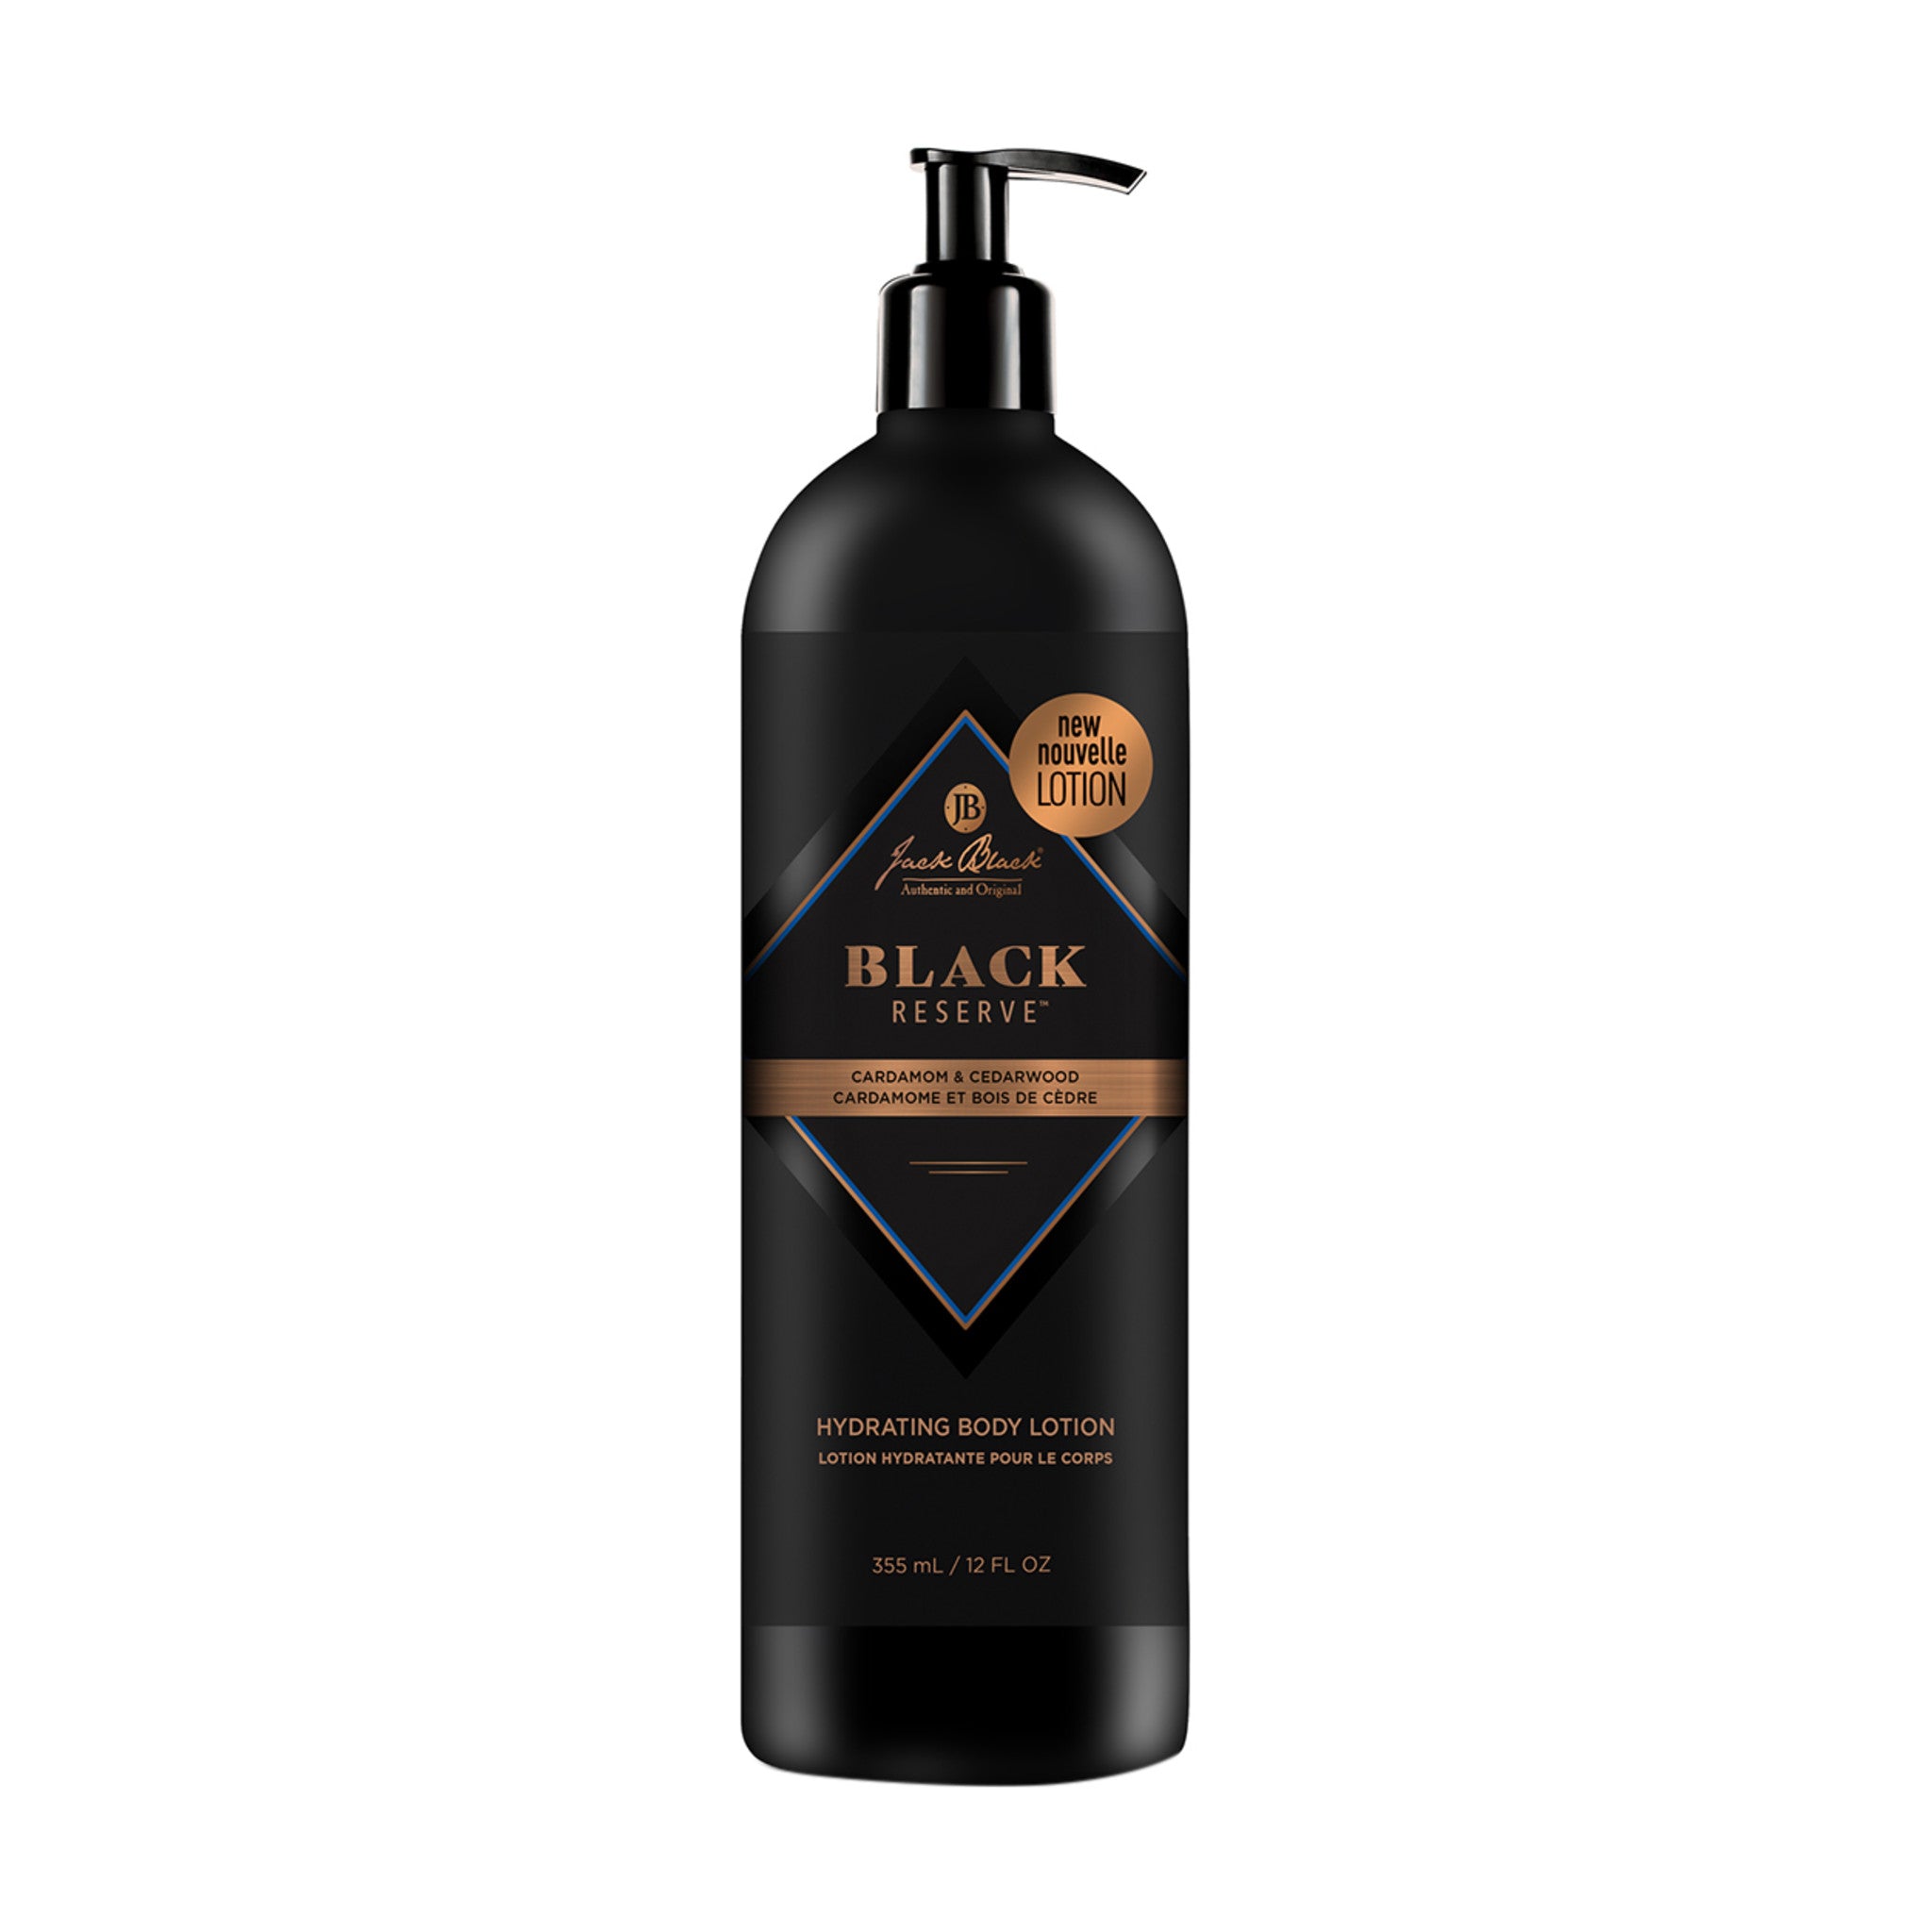 Black Reserve Hydrating Body Lotion main image.